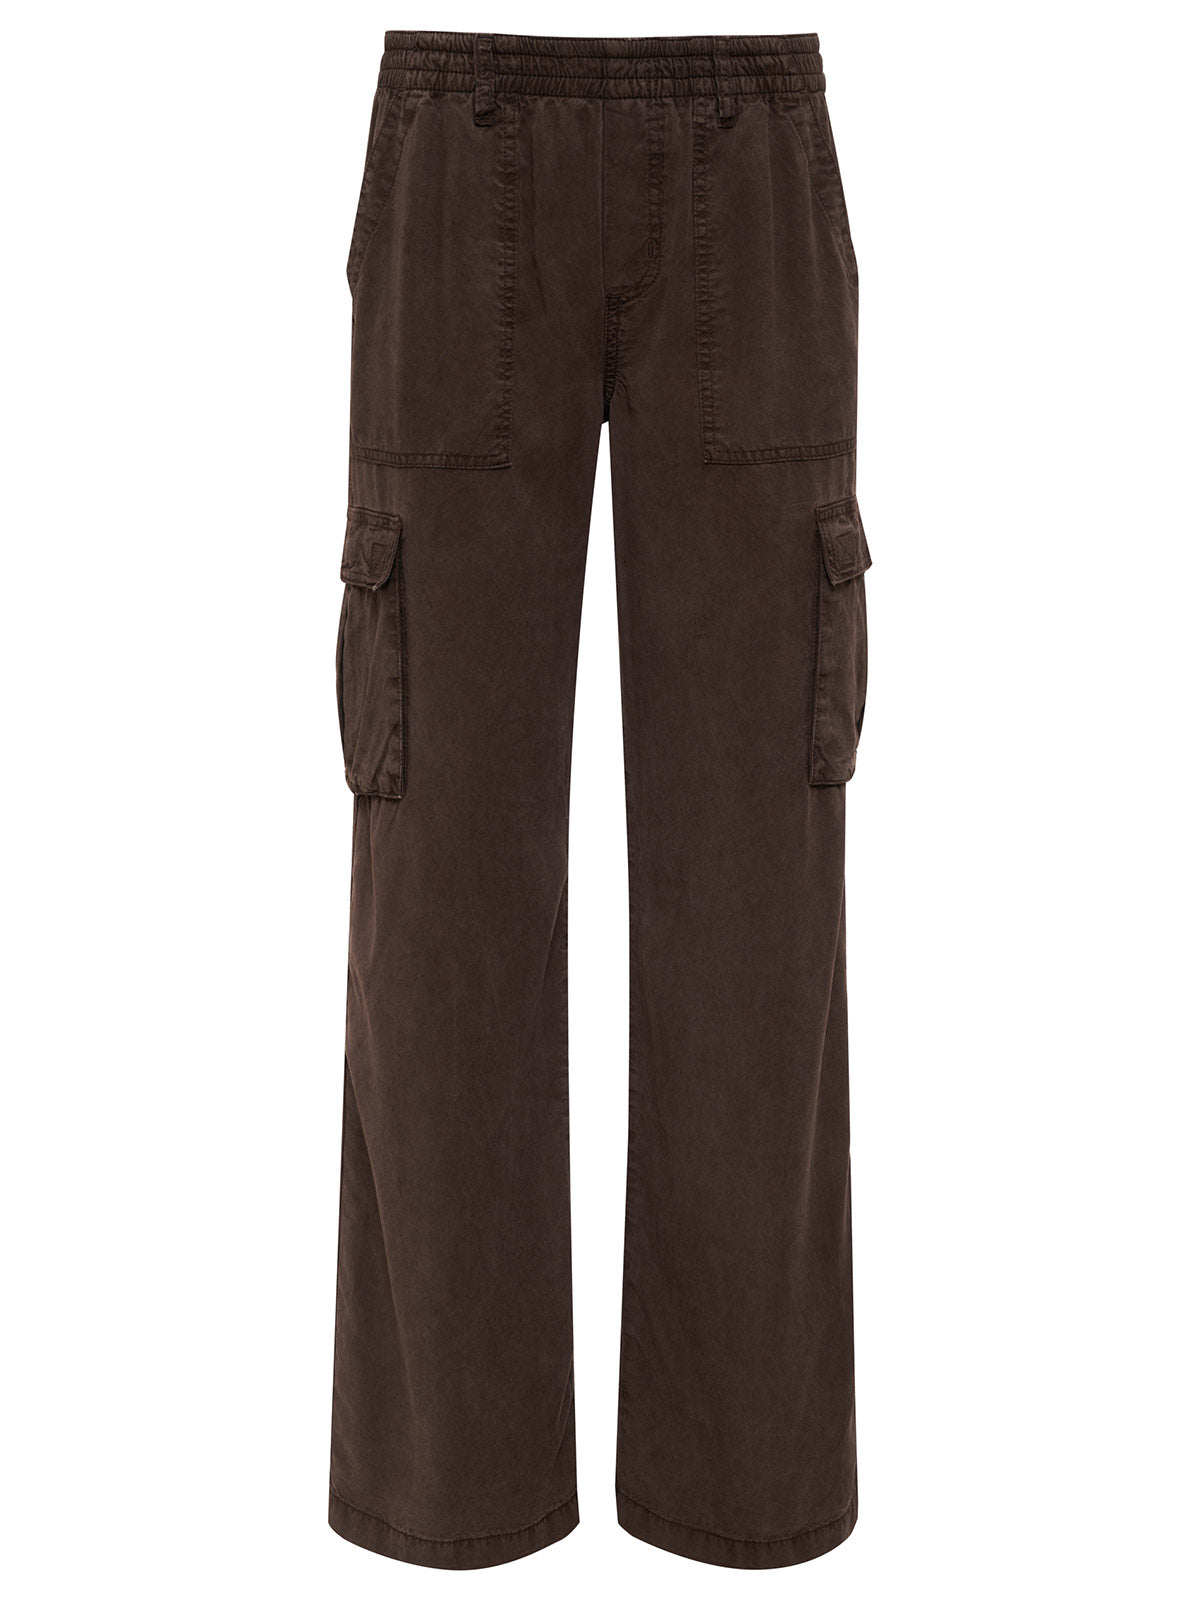 Relaxed Reissue Cargo Standard Rise Pant Mud Bath